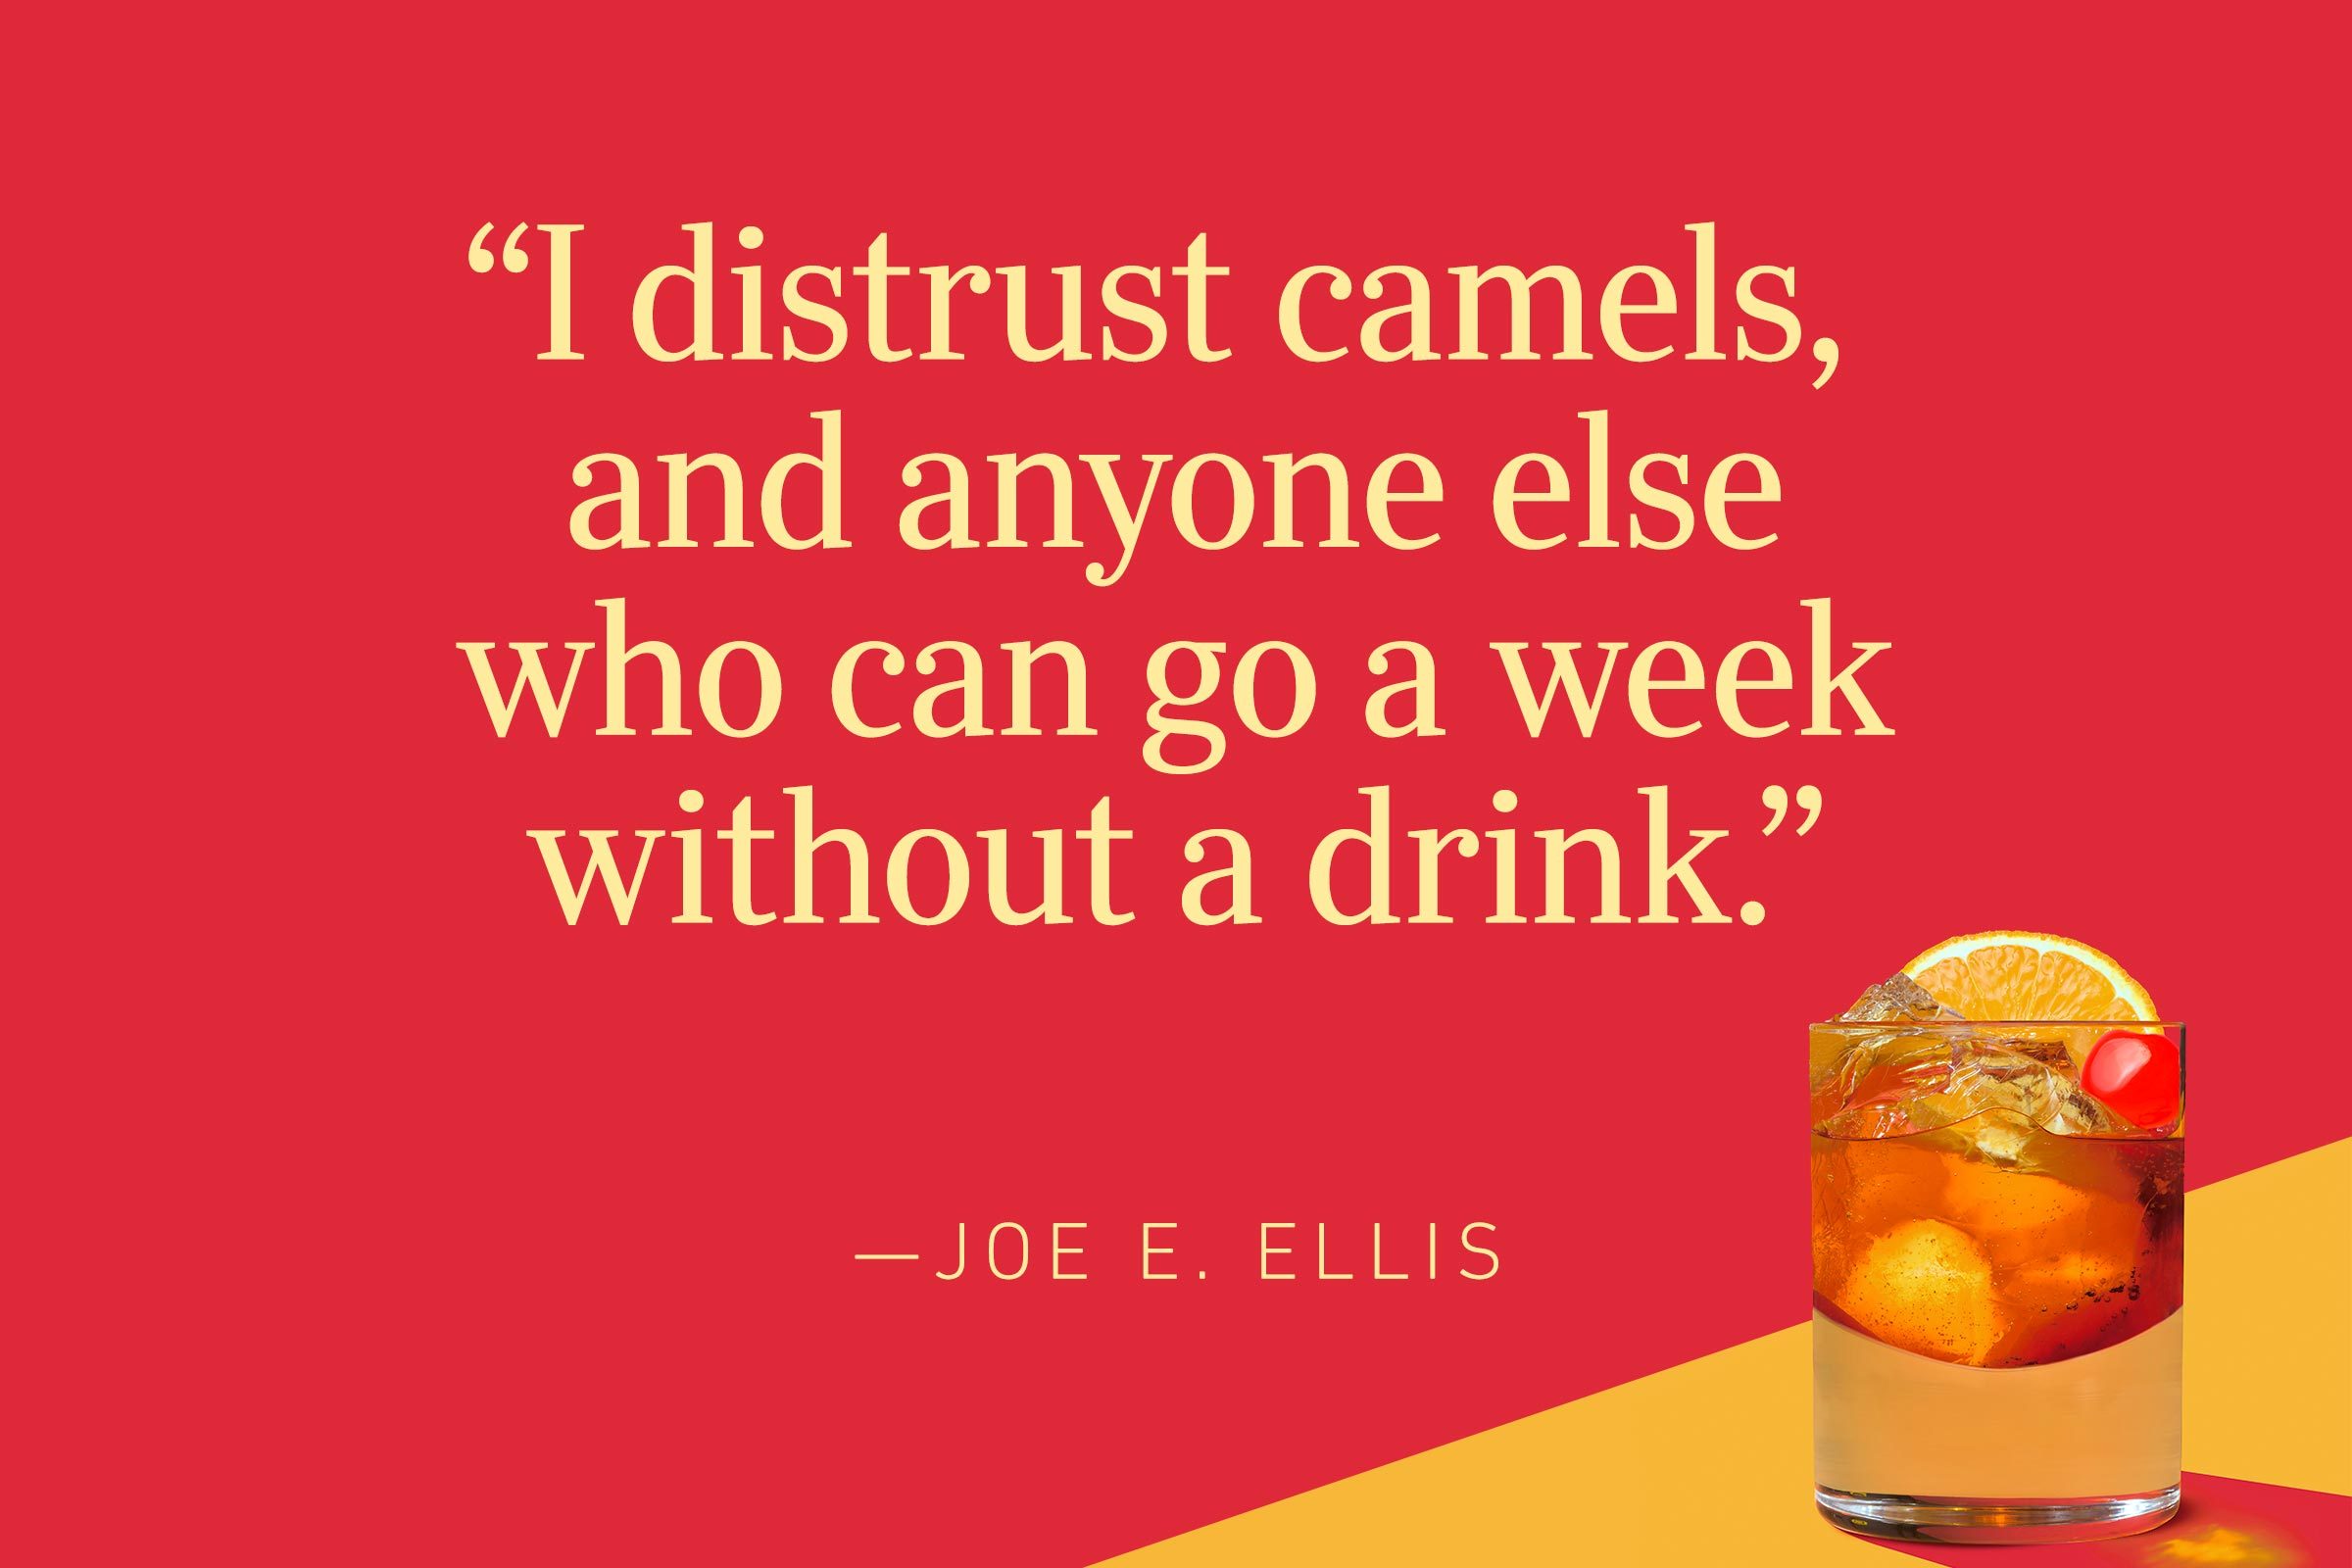 https://www.rd.com/wp-content/uploads/2018/07/i-distrust-camels-and-anyone-else-who-can-go-a-week-without-a-drink-joe-e-ellis.jpg?fit=696%2C464